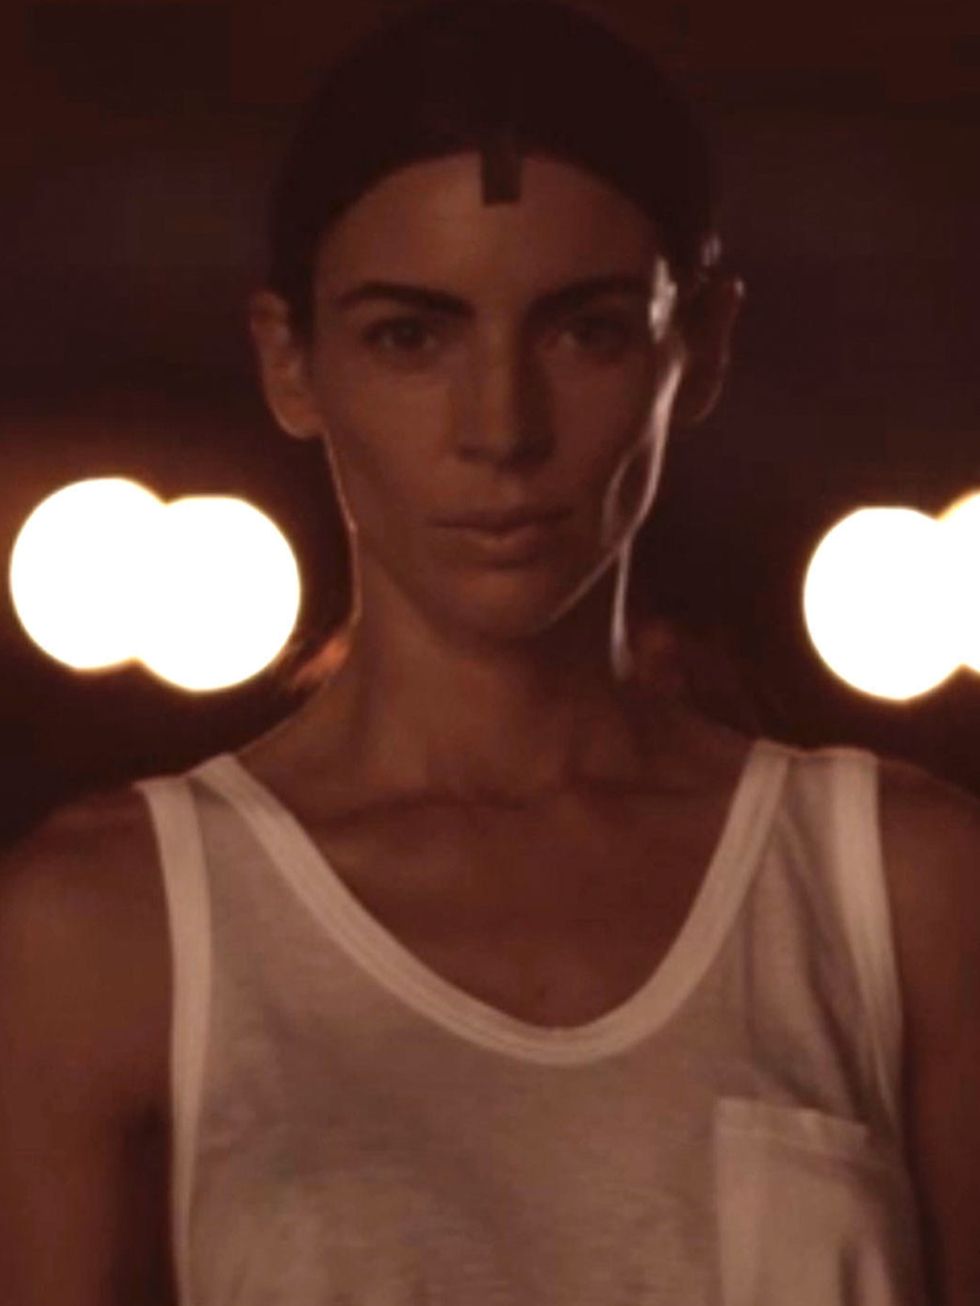 <p>Liberty Ross in the Alexander Wang video.</p>